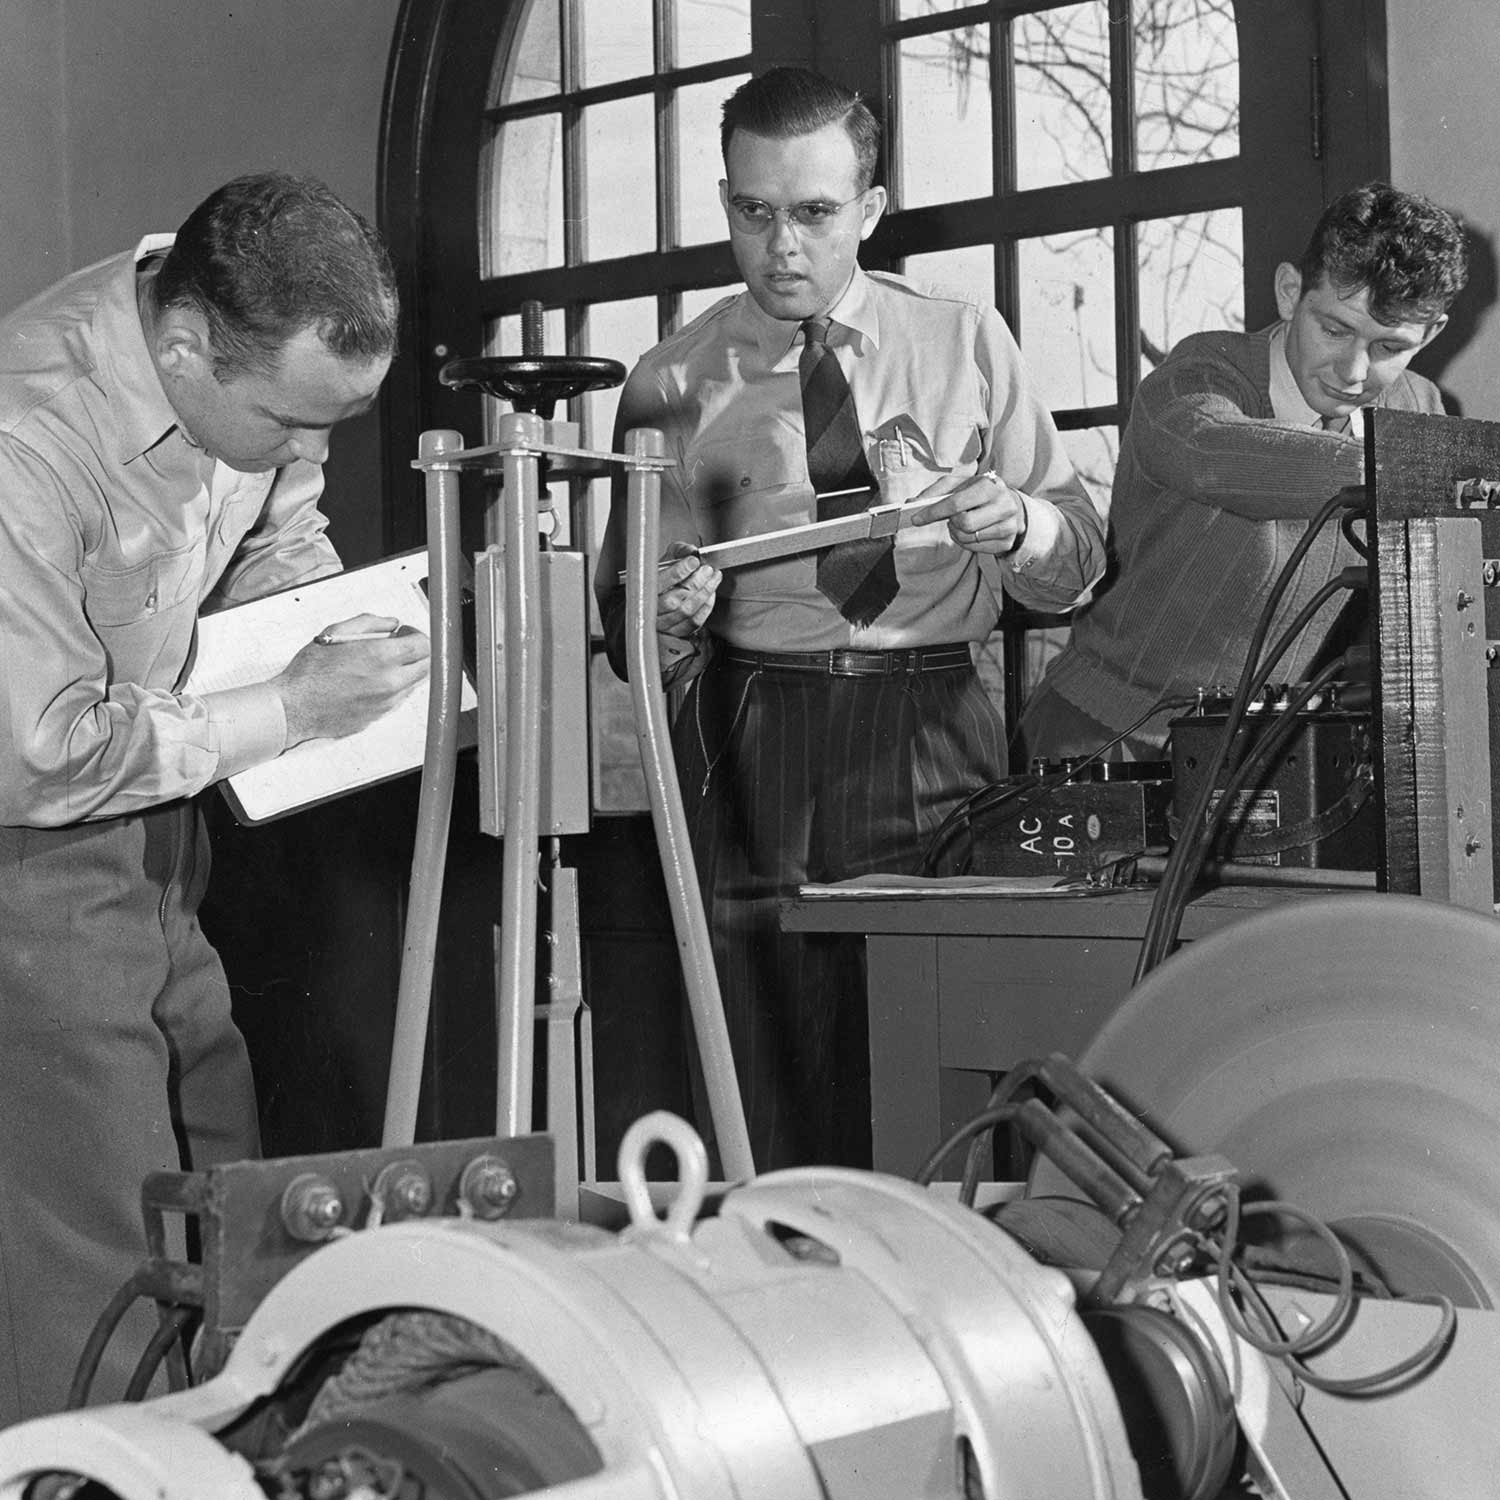 Beginning in 1945, scientists could start a UT graduate program in chemistry or physics without interrupting their employment.